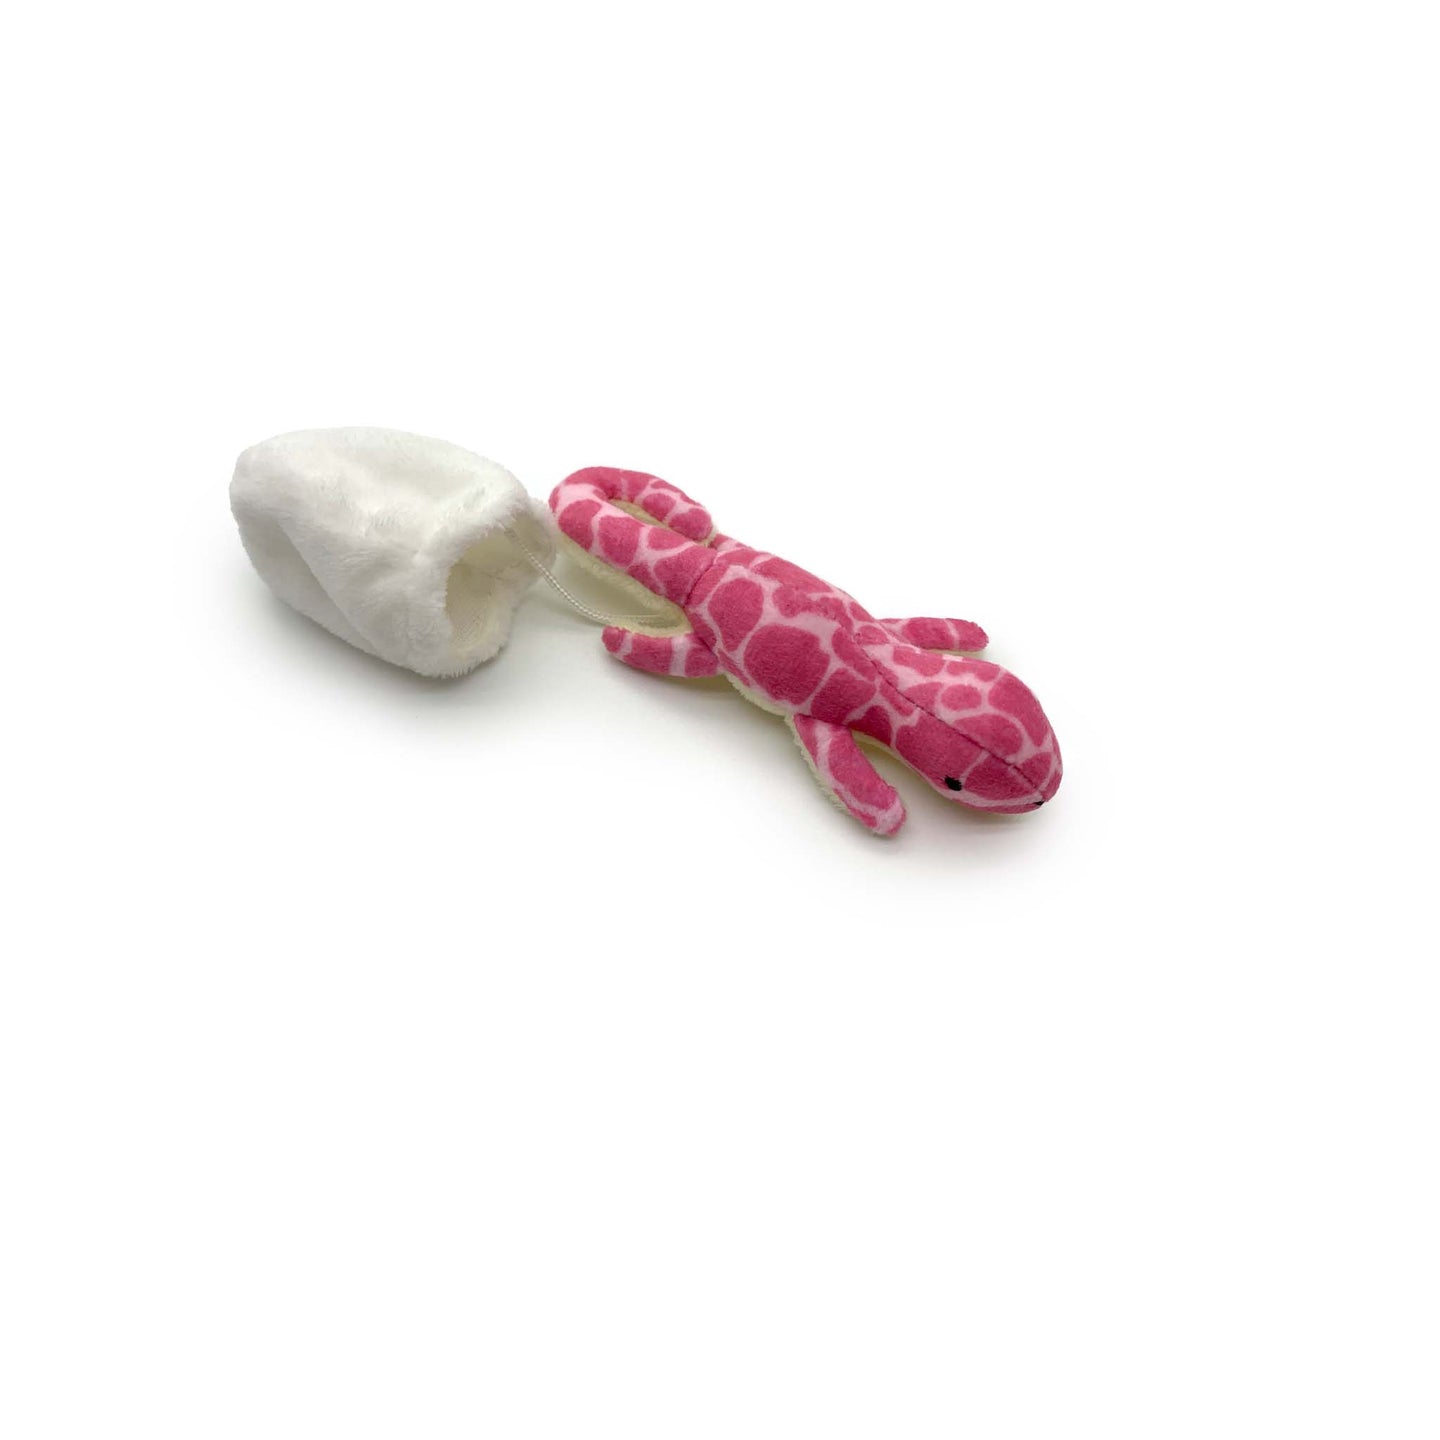 Gecko Getaway: “Gink” Gecko Pink with Egg Plush Toy